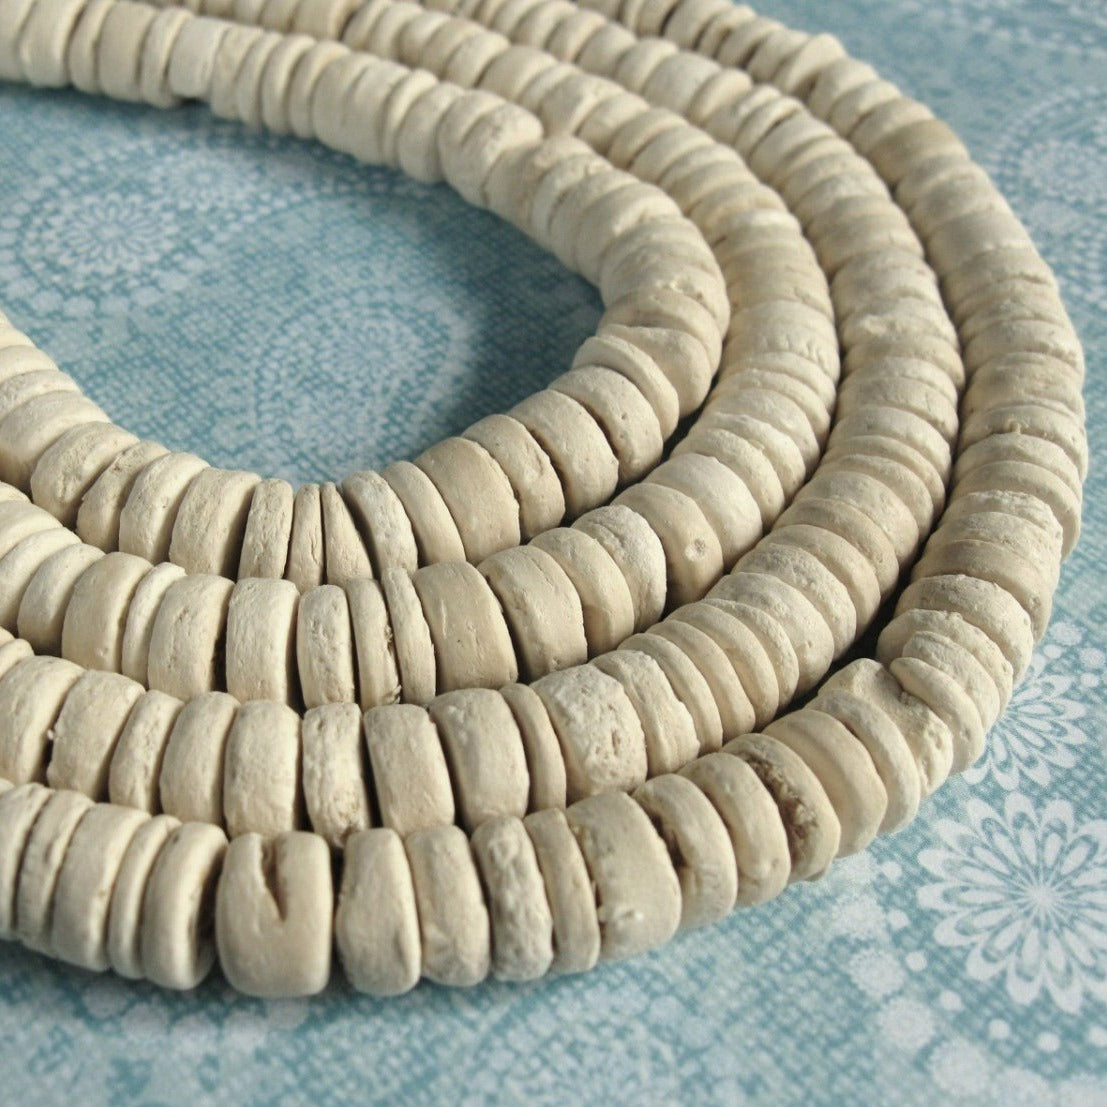 100 Natural color Coco wood Beads - Donuts Rondelle Disk Beads 8mm